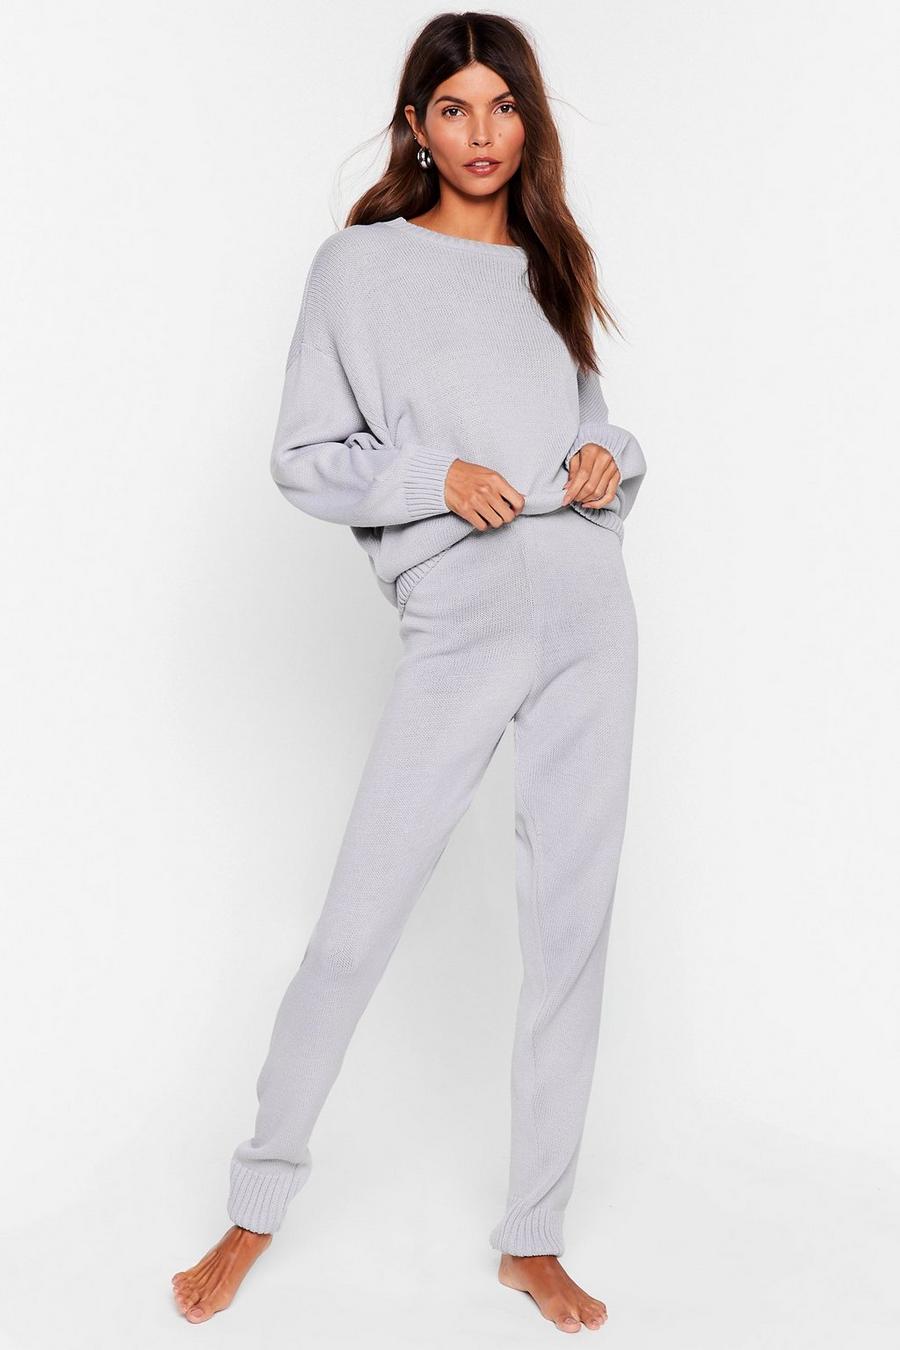 Lounge What I Was Looking For Jumper and Jogger Set